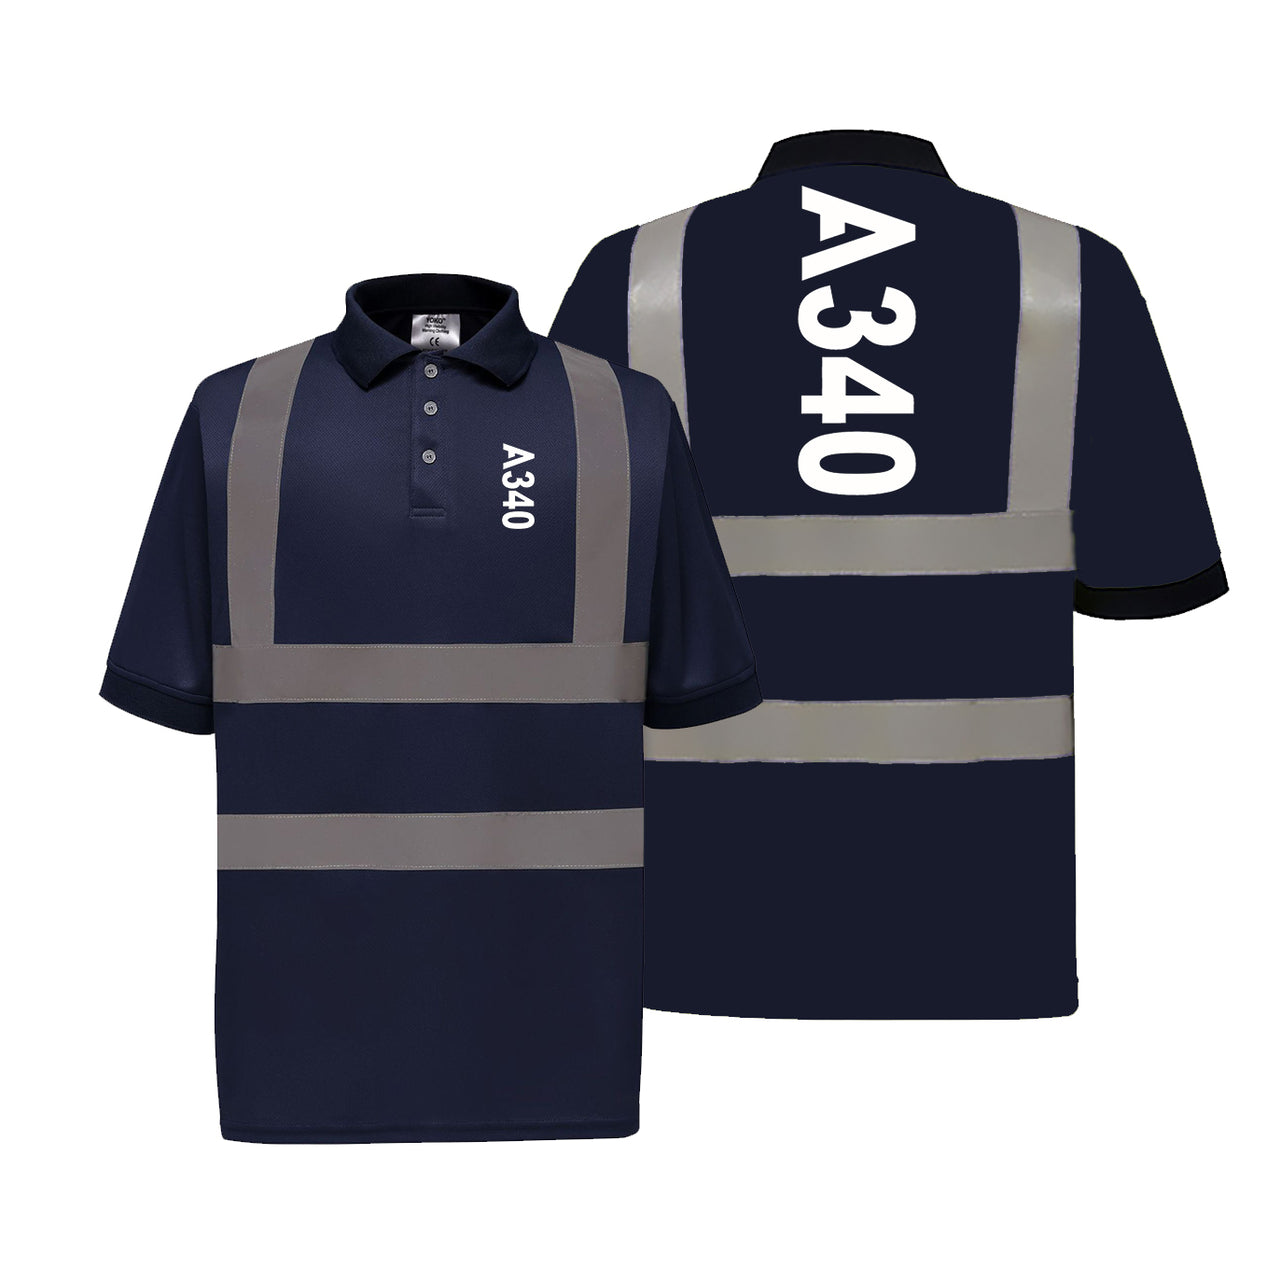 A340 Text Designed Reflective Polo T-Shirts